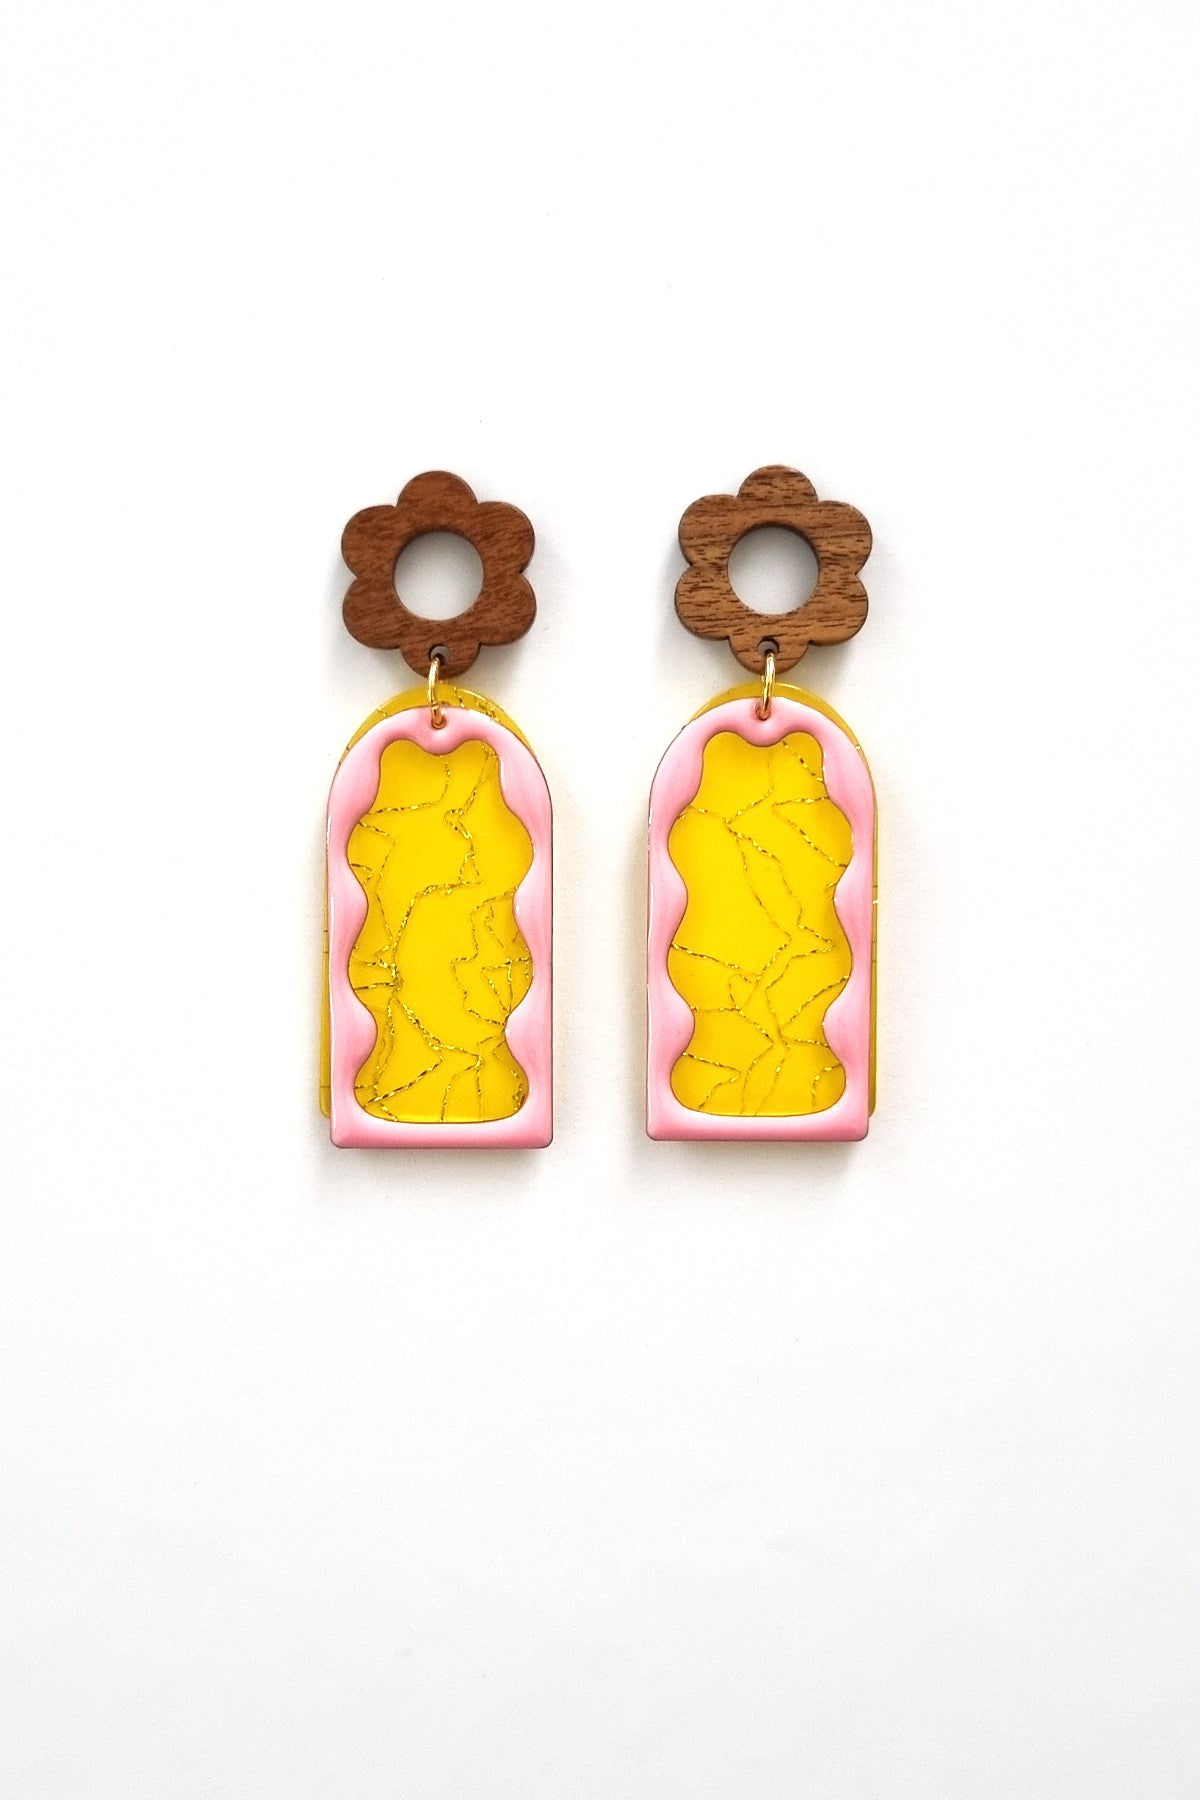 A pair of stud dangle earrings lay against a white background. They feature a wooden flower stud top followed by a yellow acrylic arch with a silver thread detail. On top sits an enamel wavy arch frame in pink.